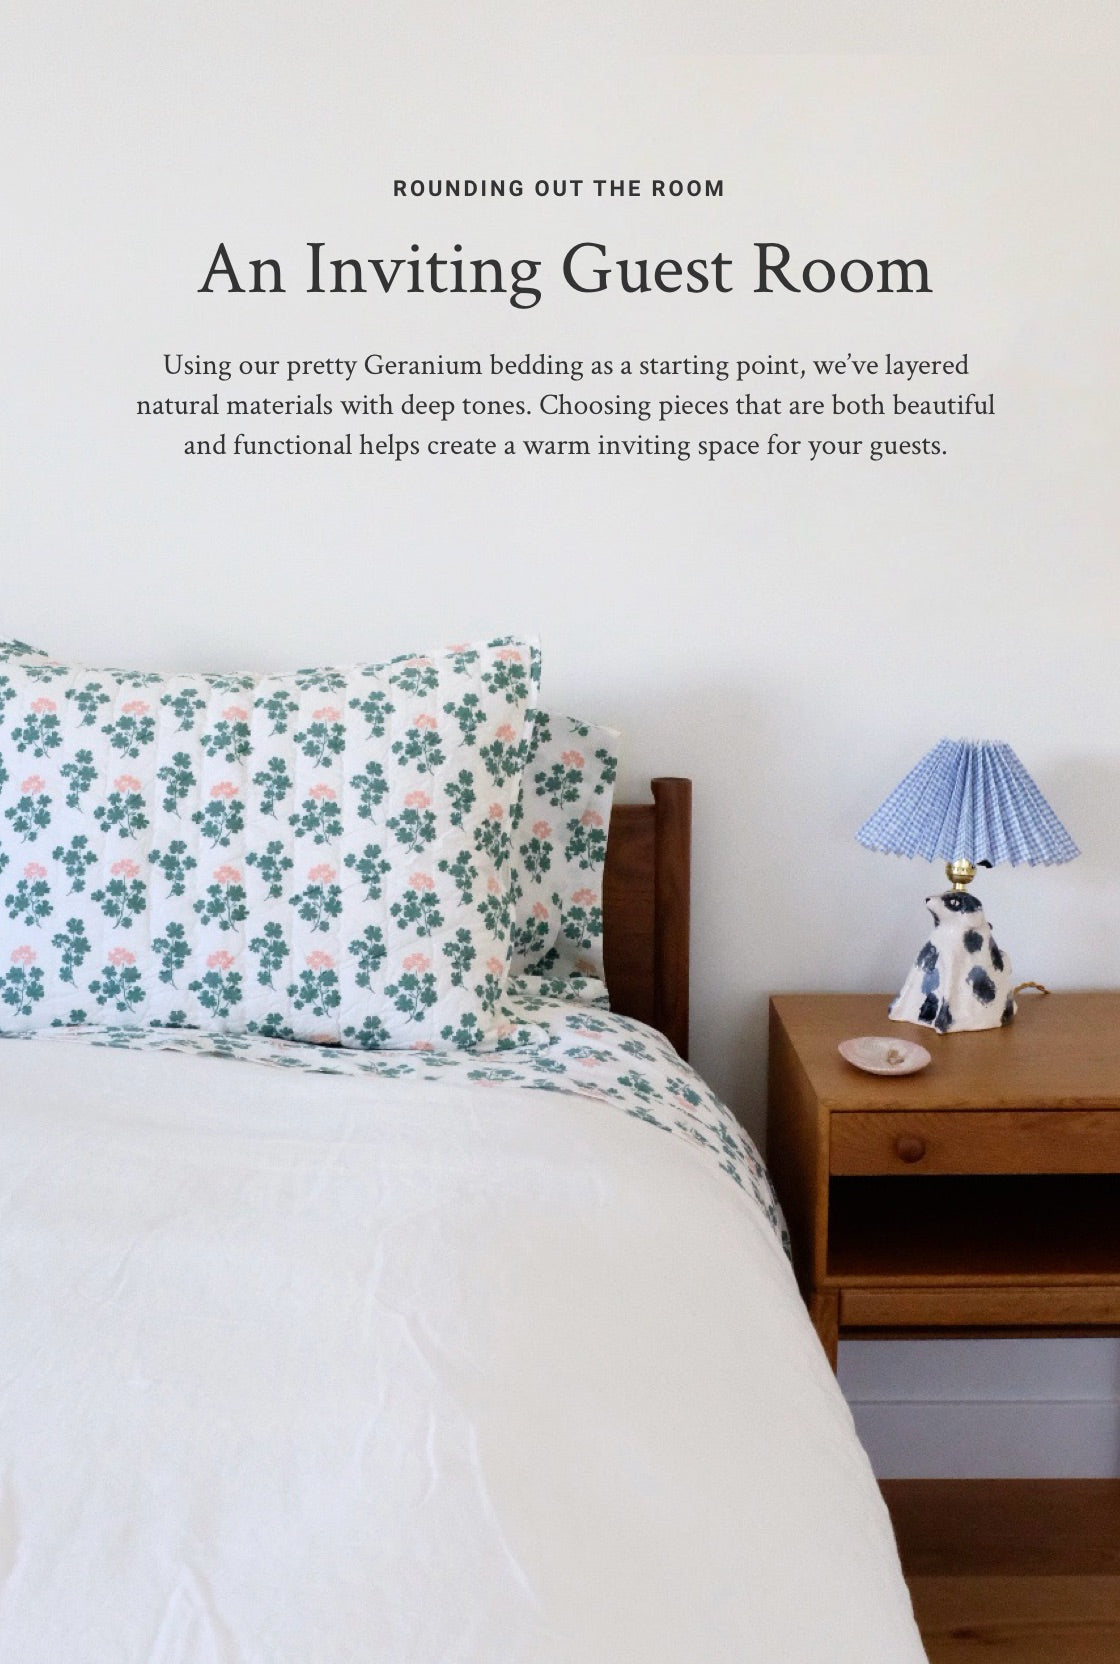 An Inviting Guest Room